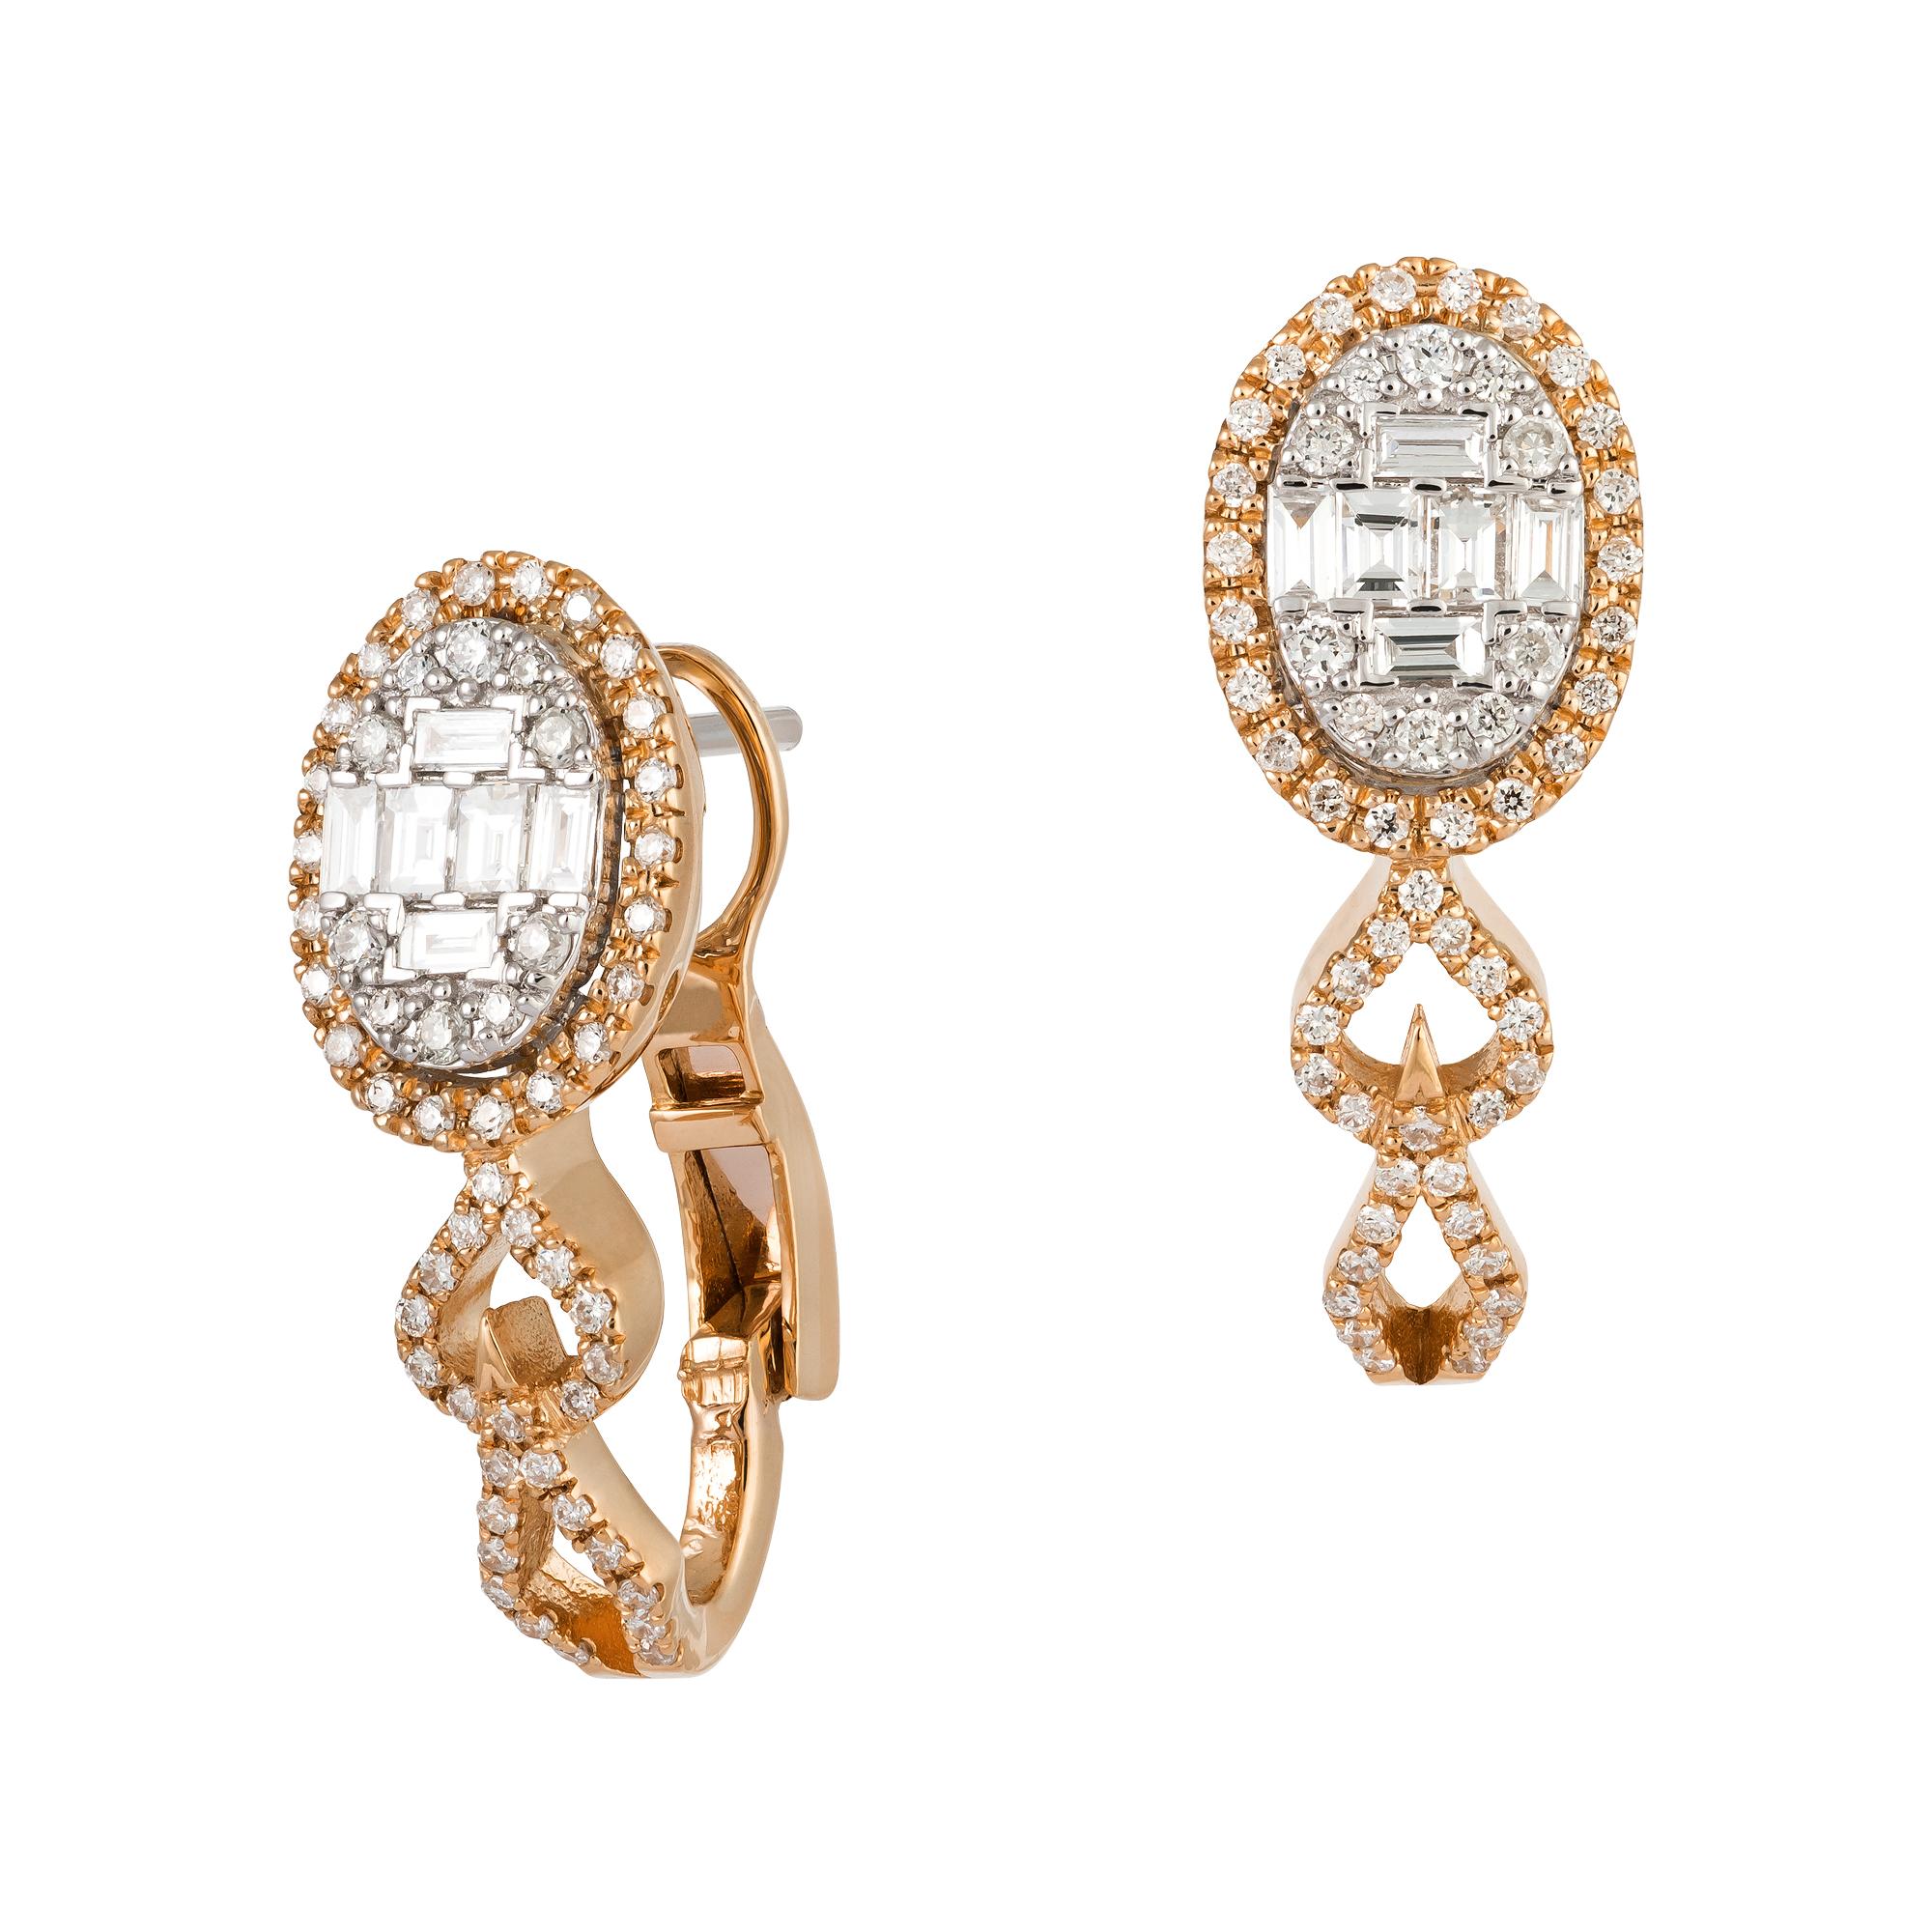 EARRING 18K White/Pink Gold Diamond 0.48 Cts/113 Pcs Tapered Baguette 0.35 Cts/12 Pcs